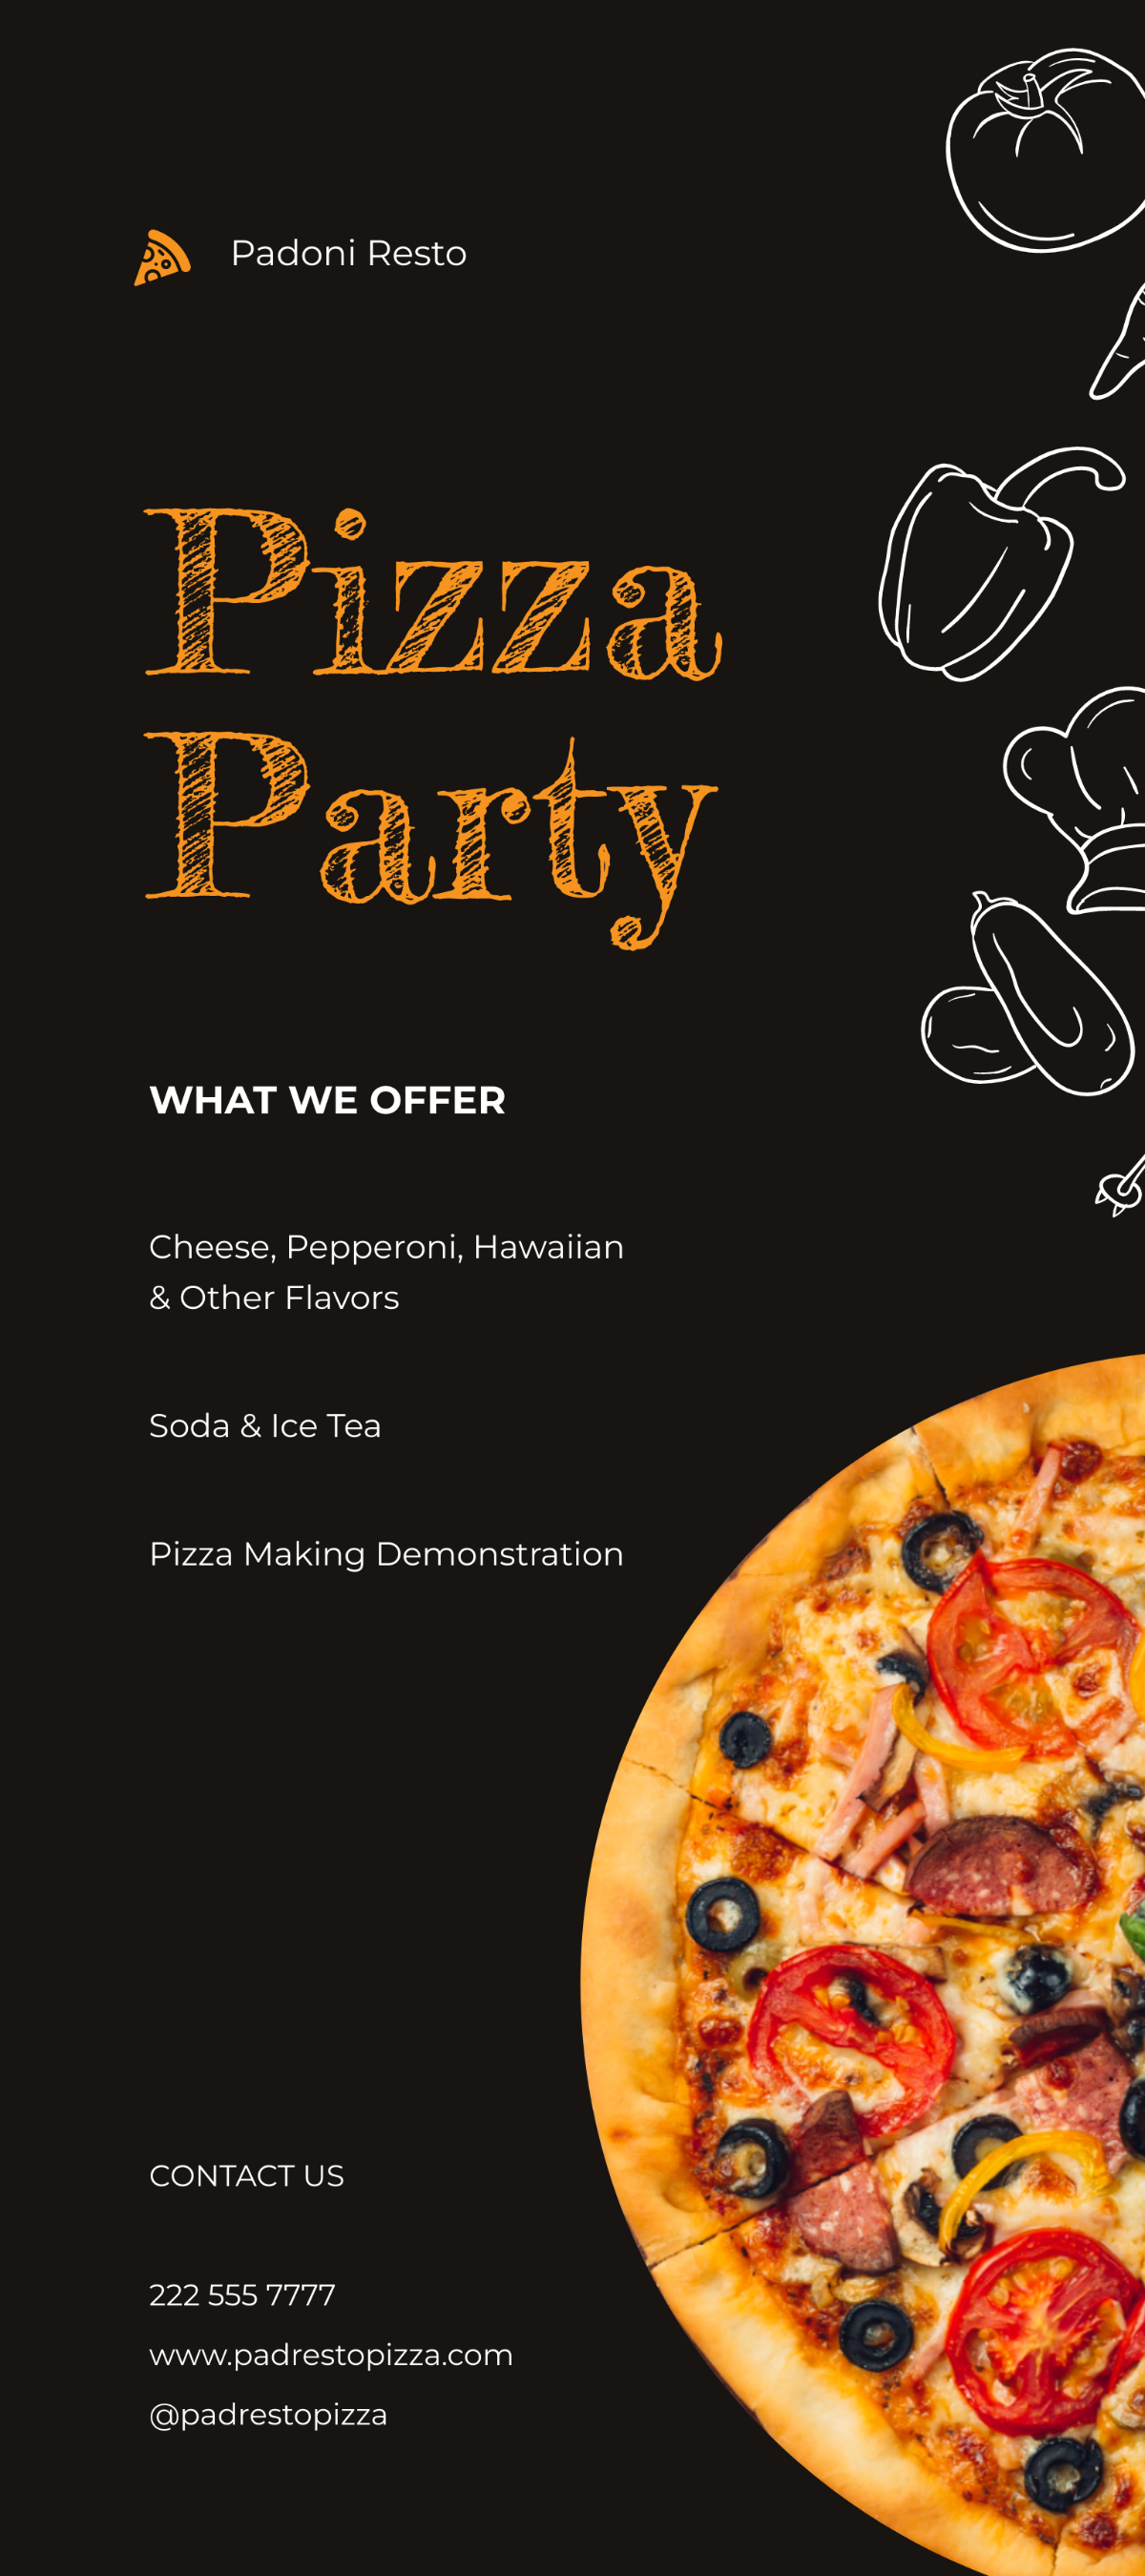 Pizza Party Rack Card Template